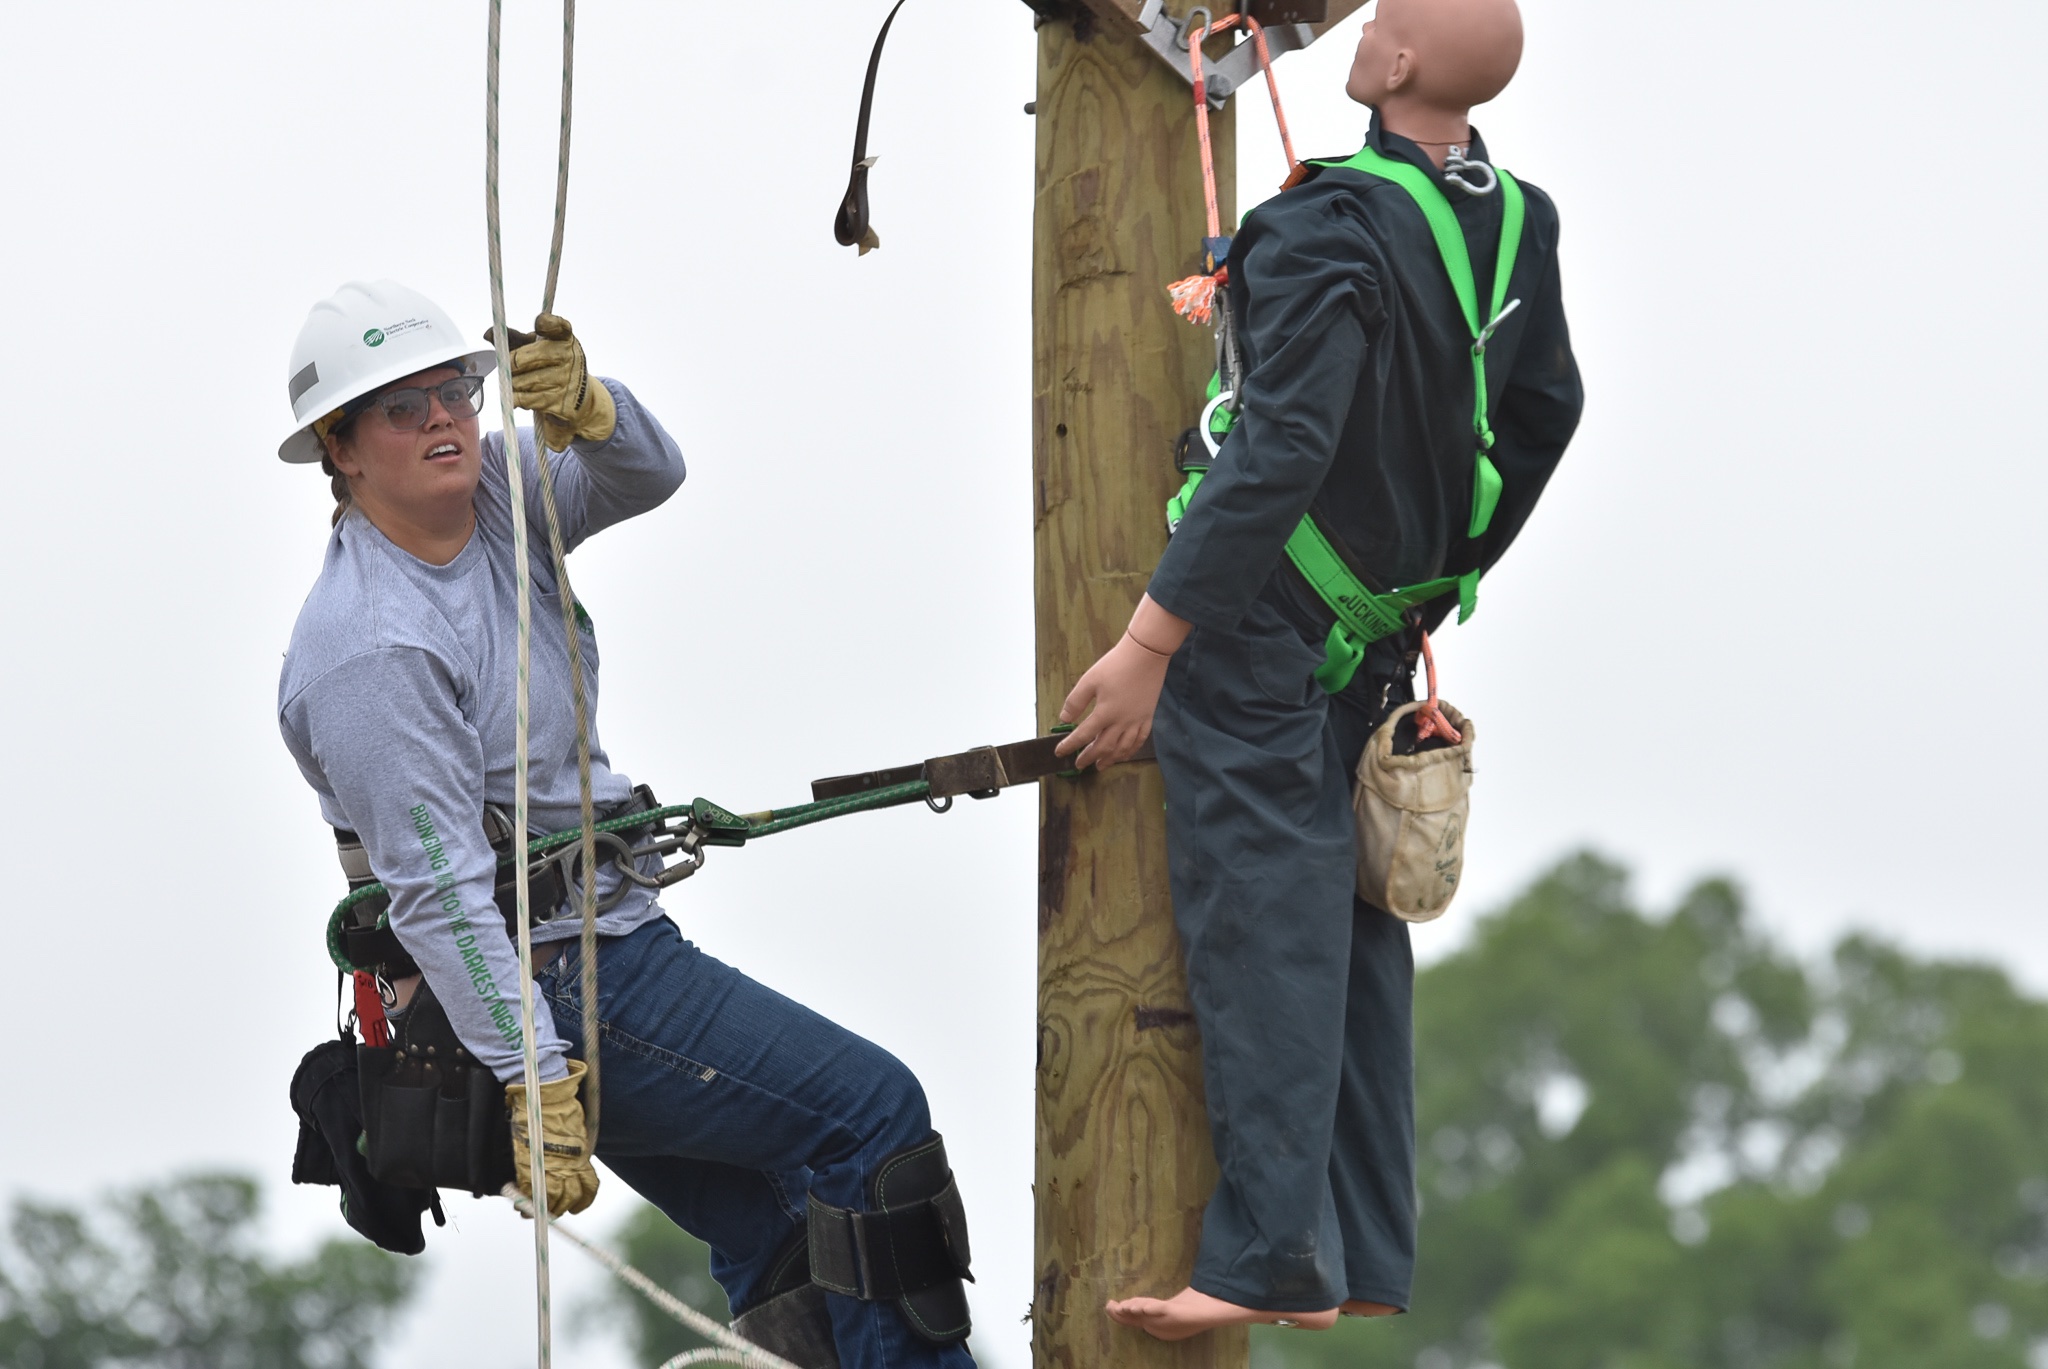 The only female competitor at this year's Gaff-n-Go Lineworker’s Rodeo, Gena Boarman with Northern Neck Electric Cooperative, completes the hurt-man rescue event.